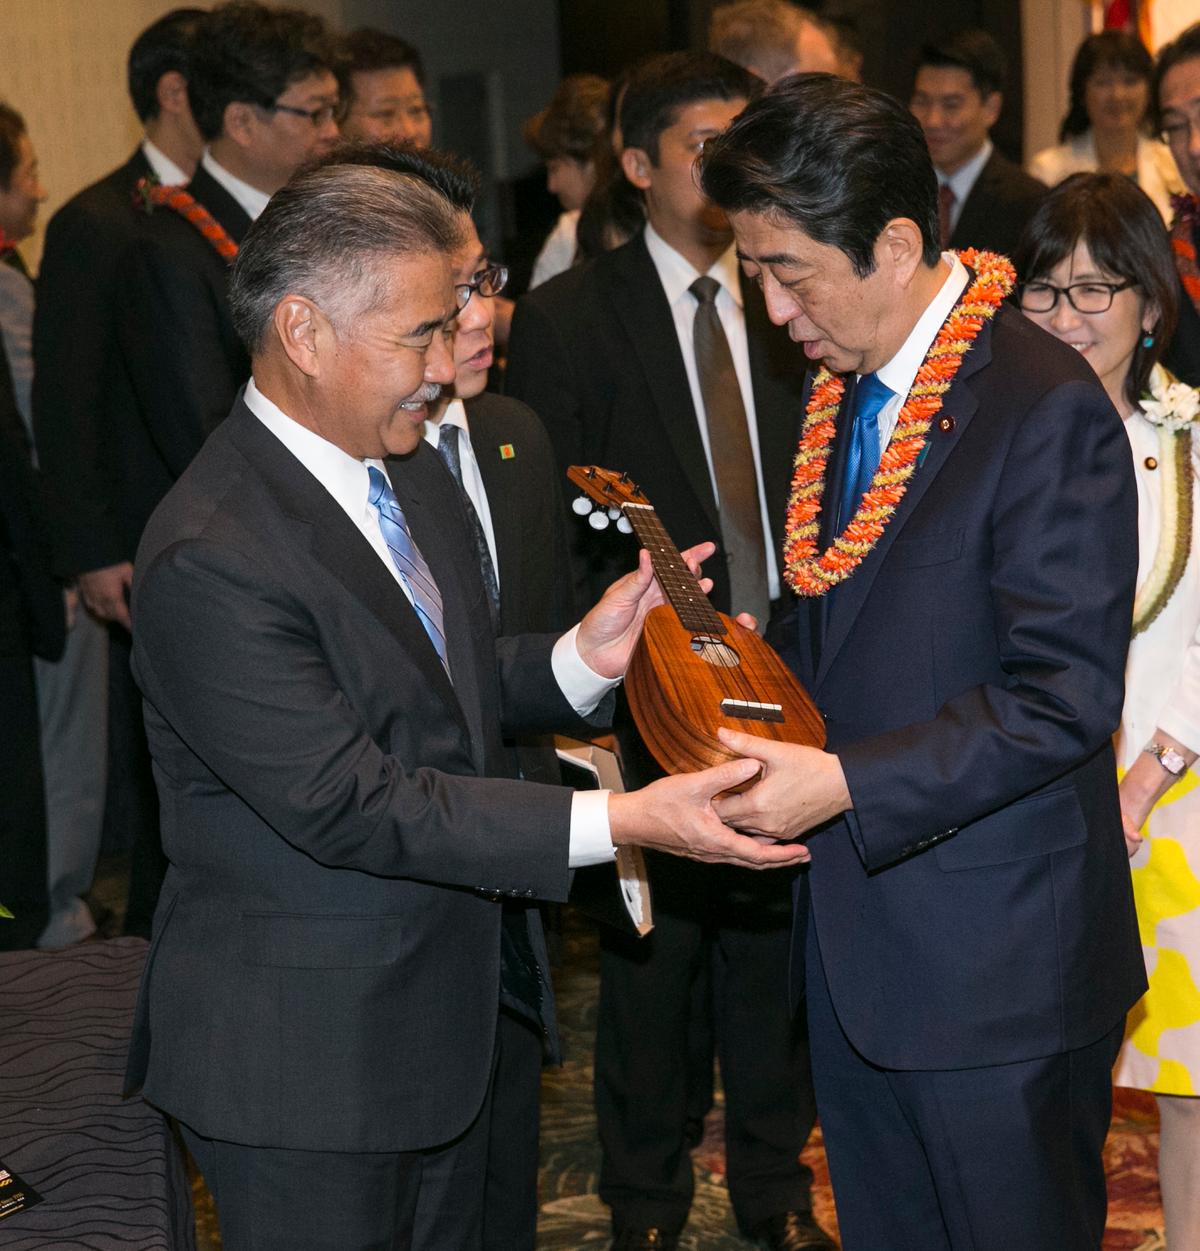 Hawaii Gov. David Ige (L) presents Japanese Prime Minister Shinzo Abe a pineapple-shaped ukulele at a dinner held in Abe's honor, in Honolulu on Dec. 26, 2016. (AP Photo/Marco Garcia)